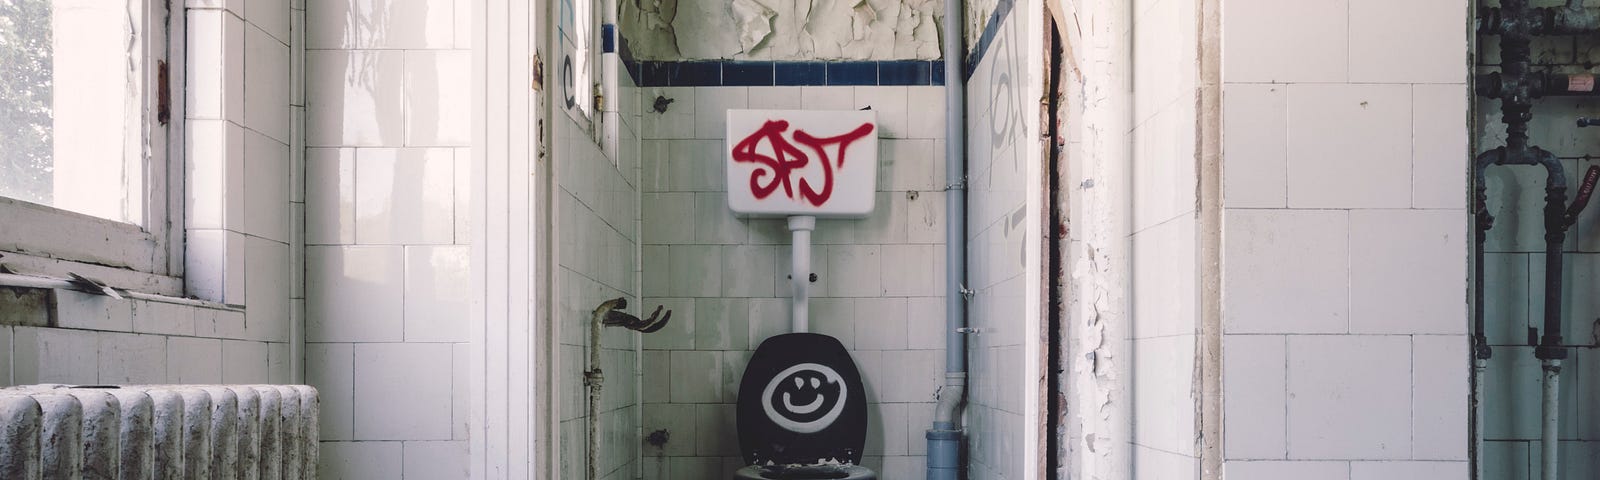 A white bathroom with dirty walls with a smiley face painted on the toilet lid